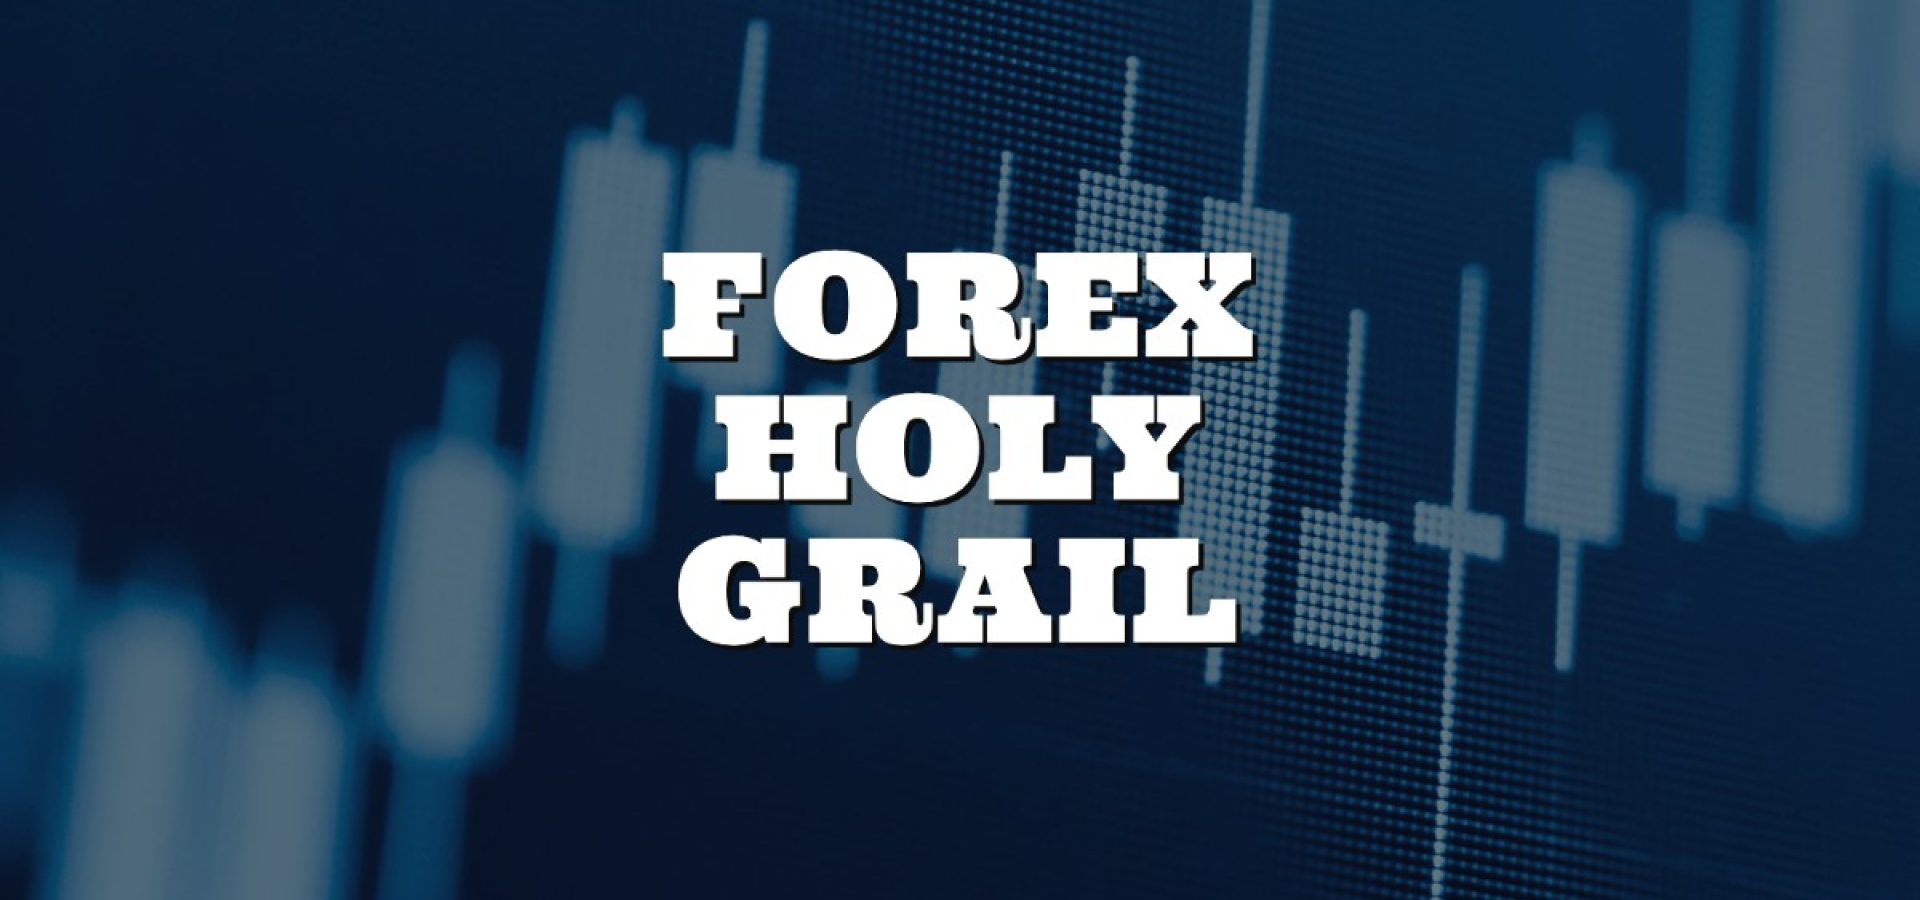 Forex holy grail - what is it?